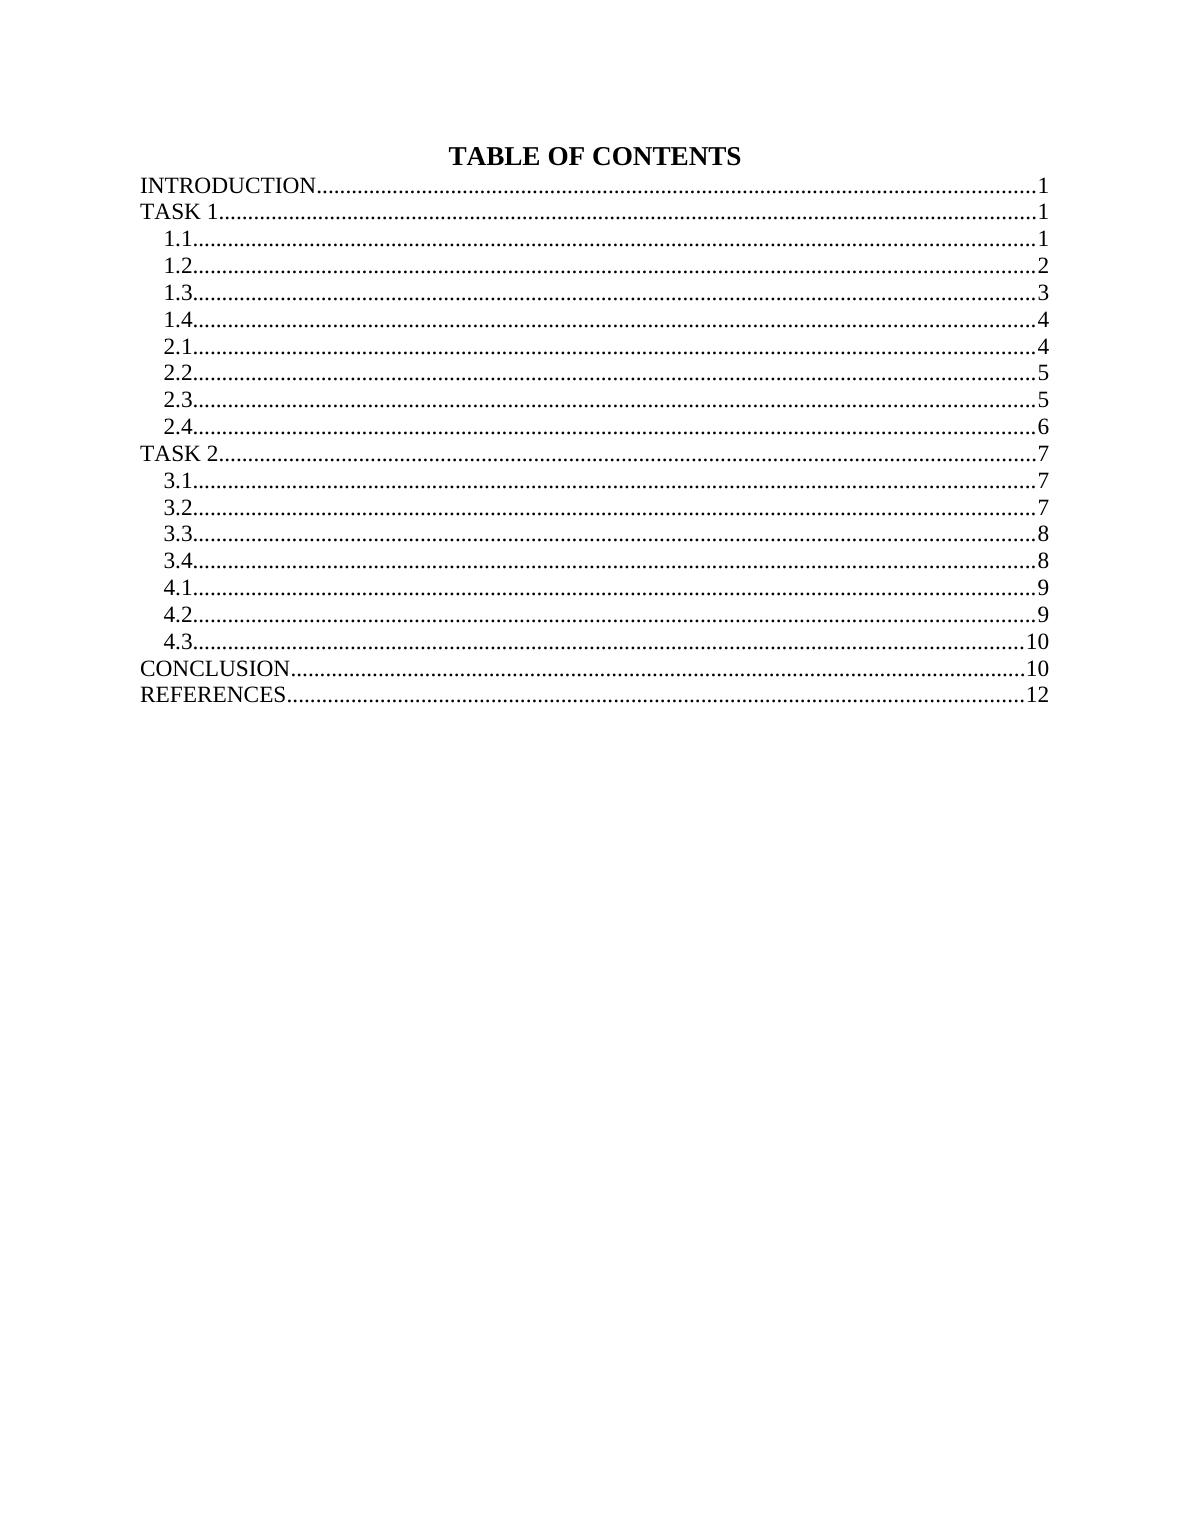 Managing Communication, Knowledge and Information TABLE OF CONTENTS_2